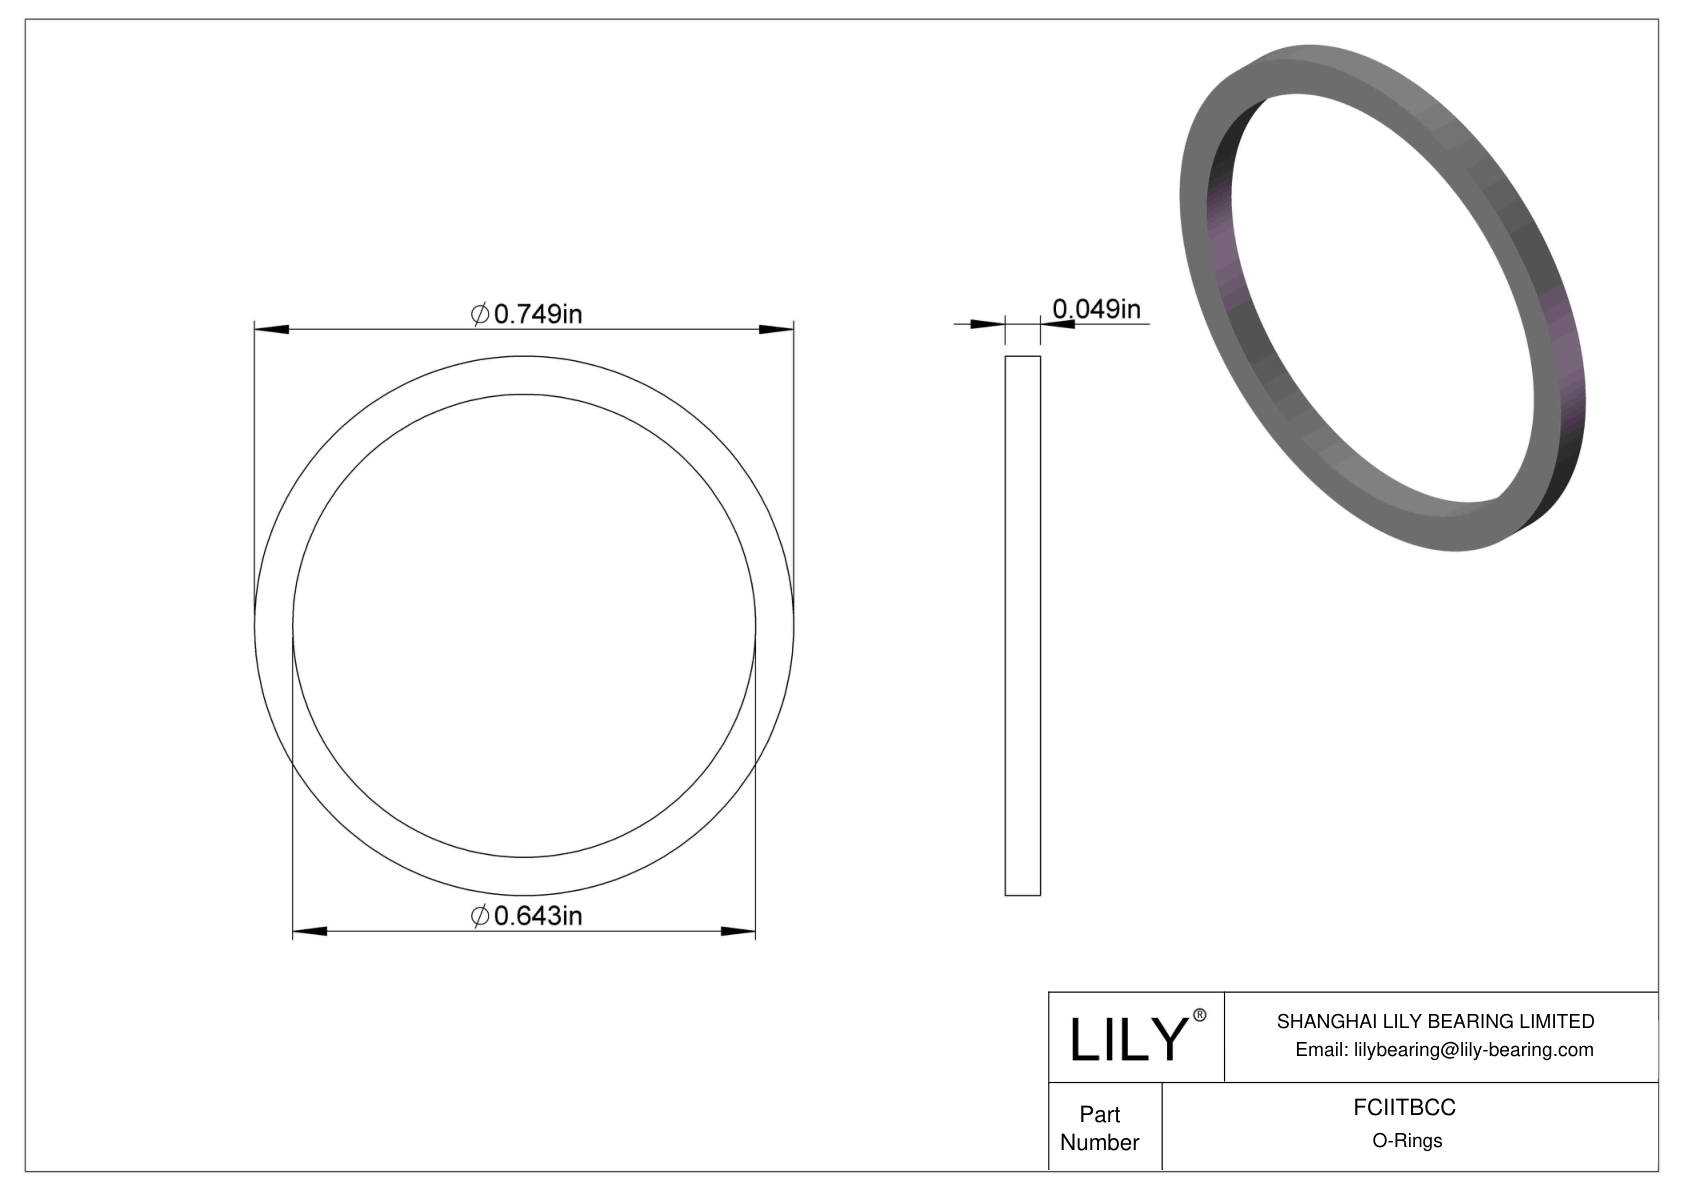 FCIITBCC O-Ring Backup Rings cad drawing